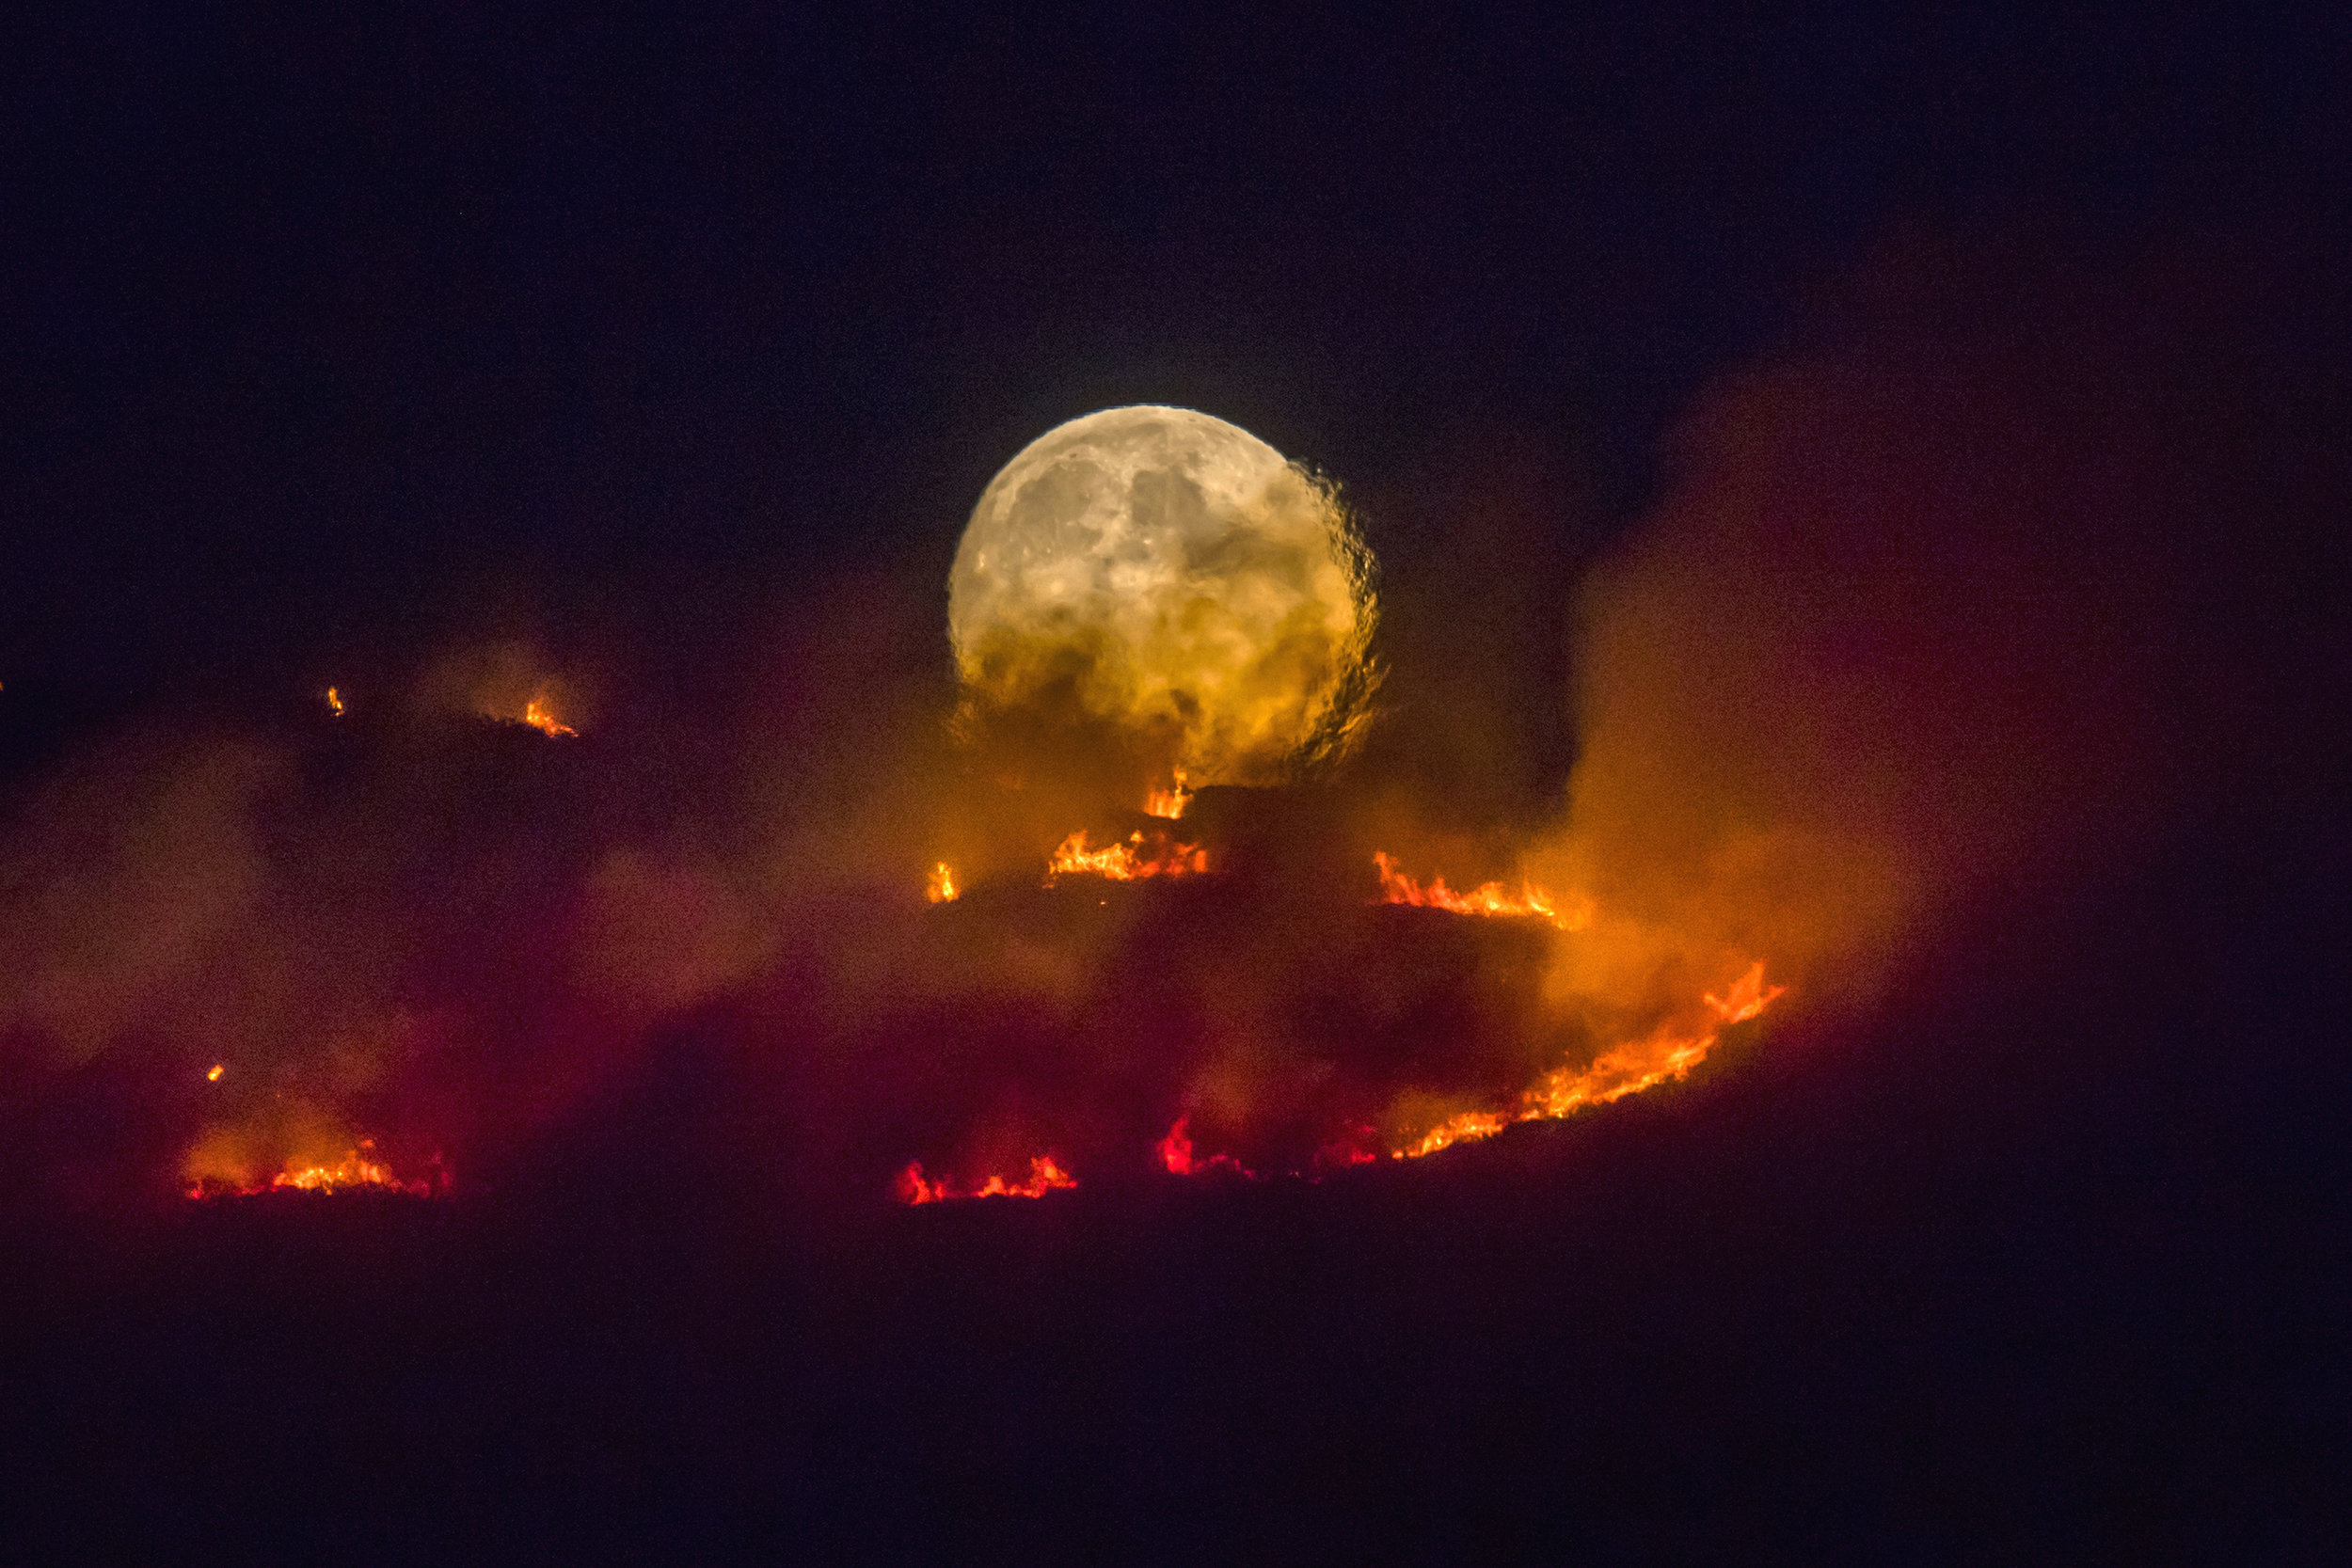  The full moon rises behind burning moorland as a large wildfire sweeps across the moors between Dovestones and Buckton Vale in Stalybridge, Greater Manchester.
Photo by Anthony Devlin, 26 June 2018
 